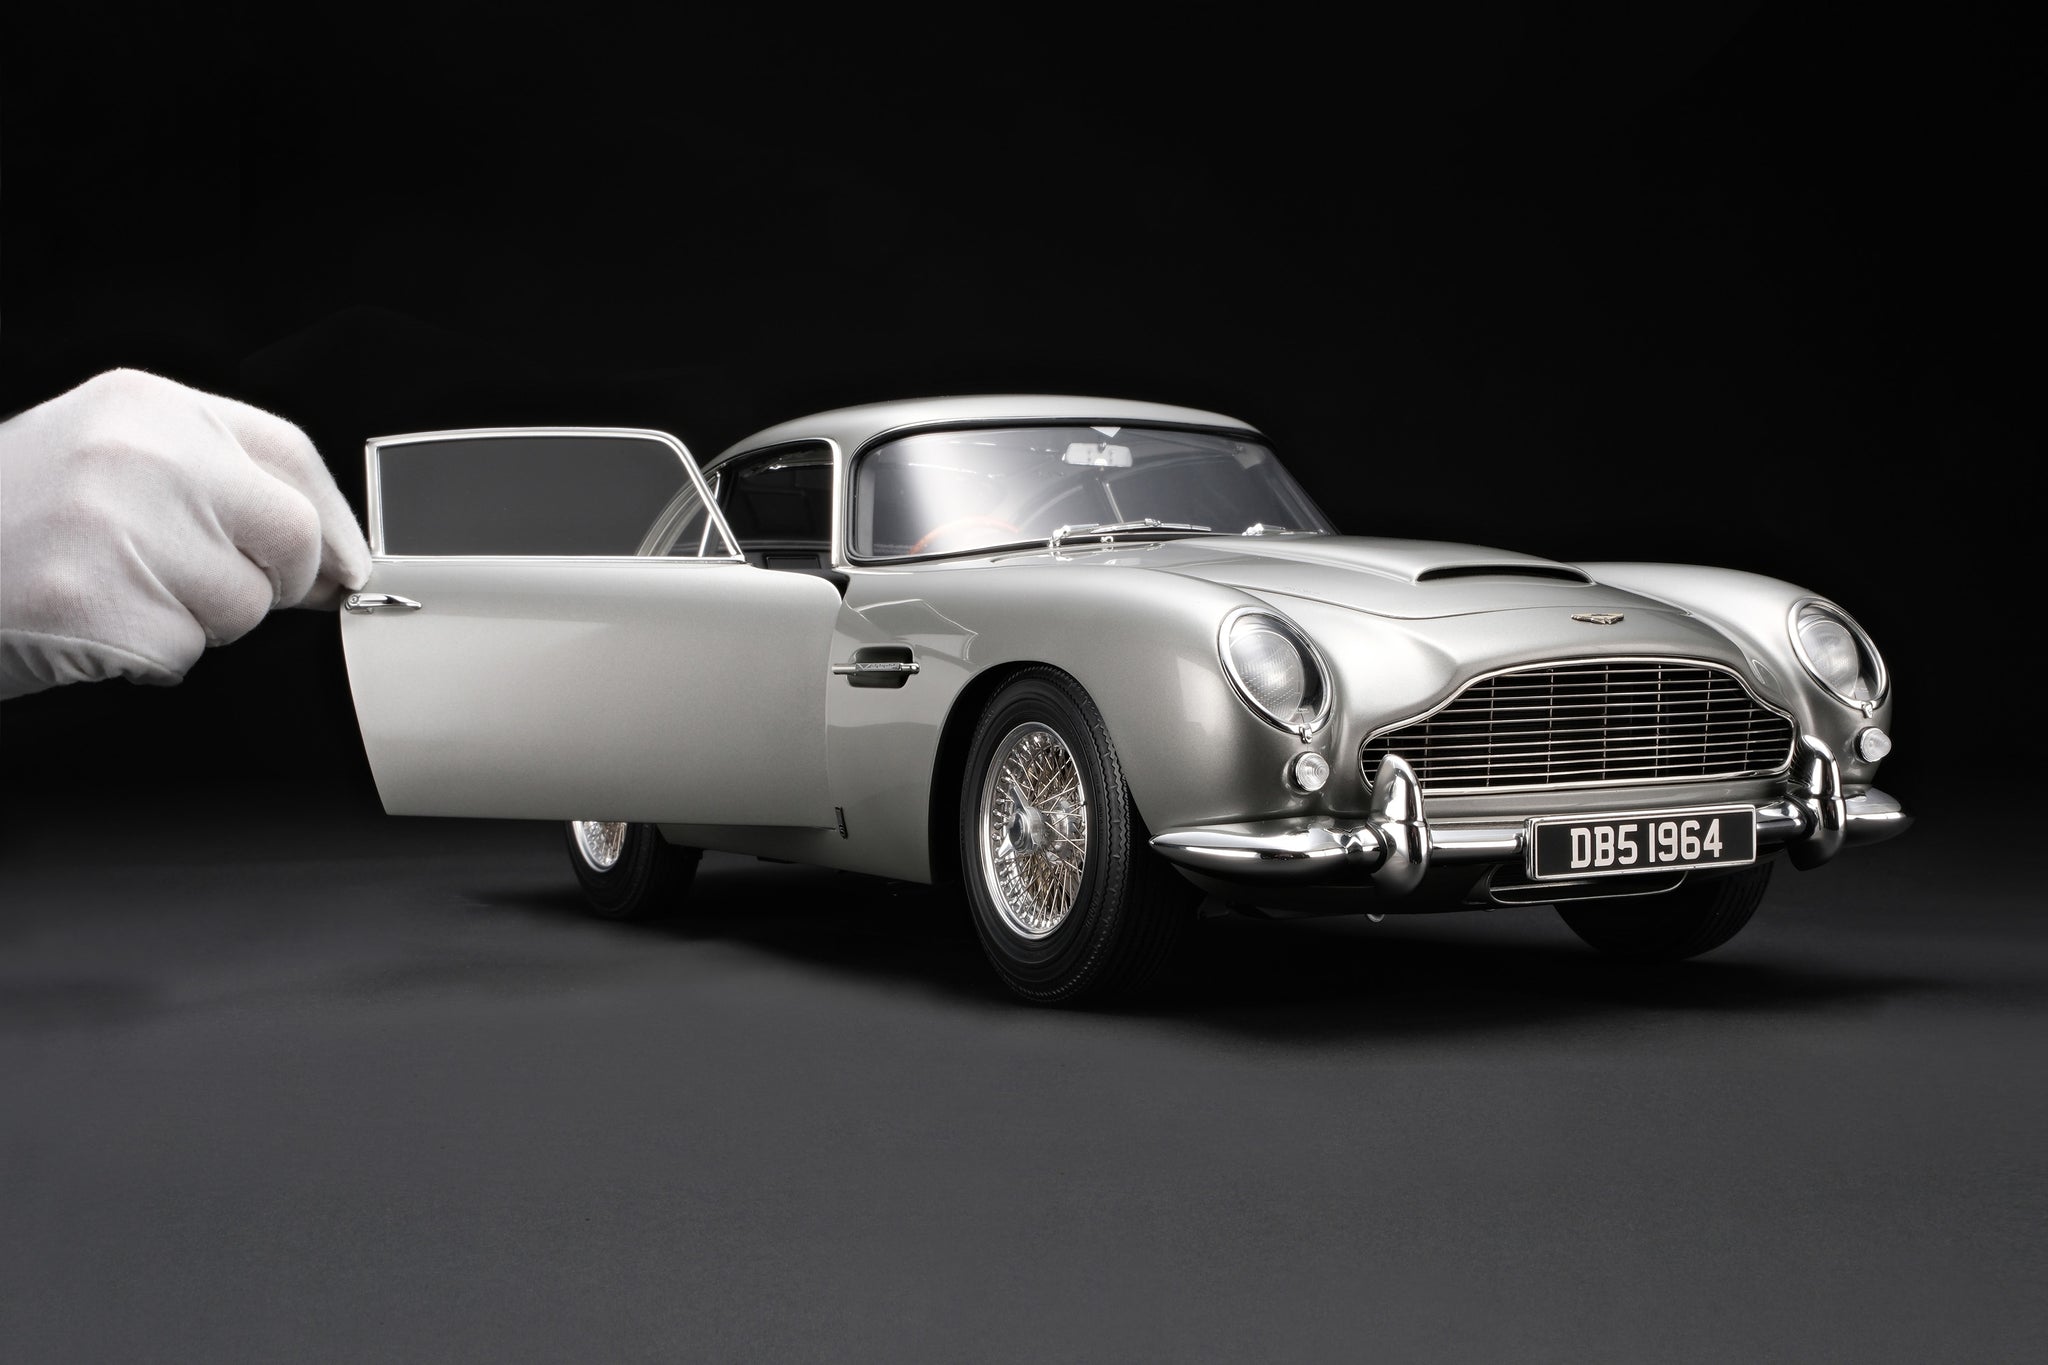 amalgam collection scale models sports cars luxury limited expensive detailed hand made handcrafted aston martin db5 vantage